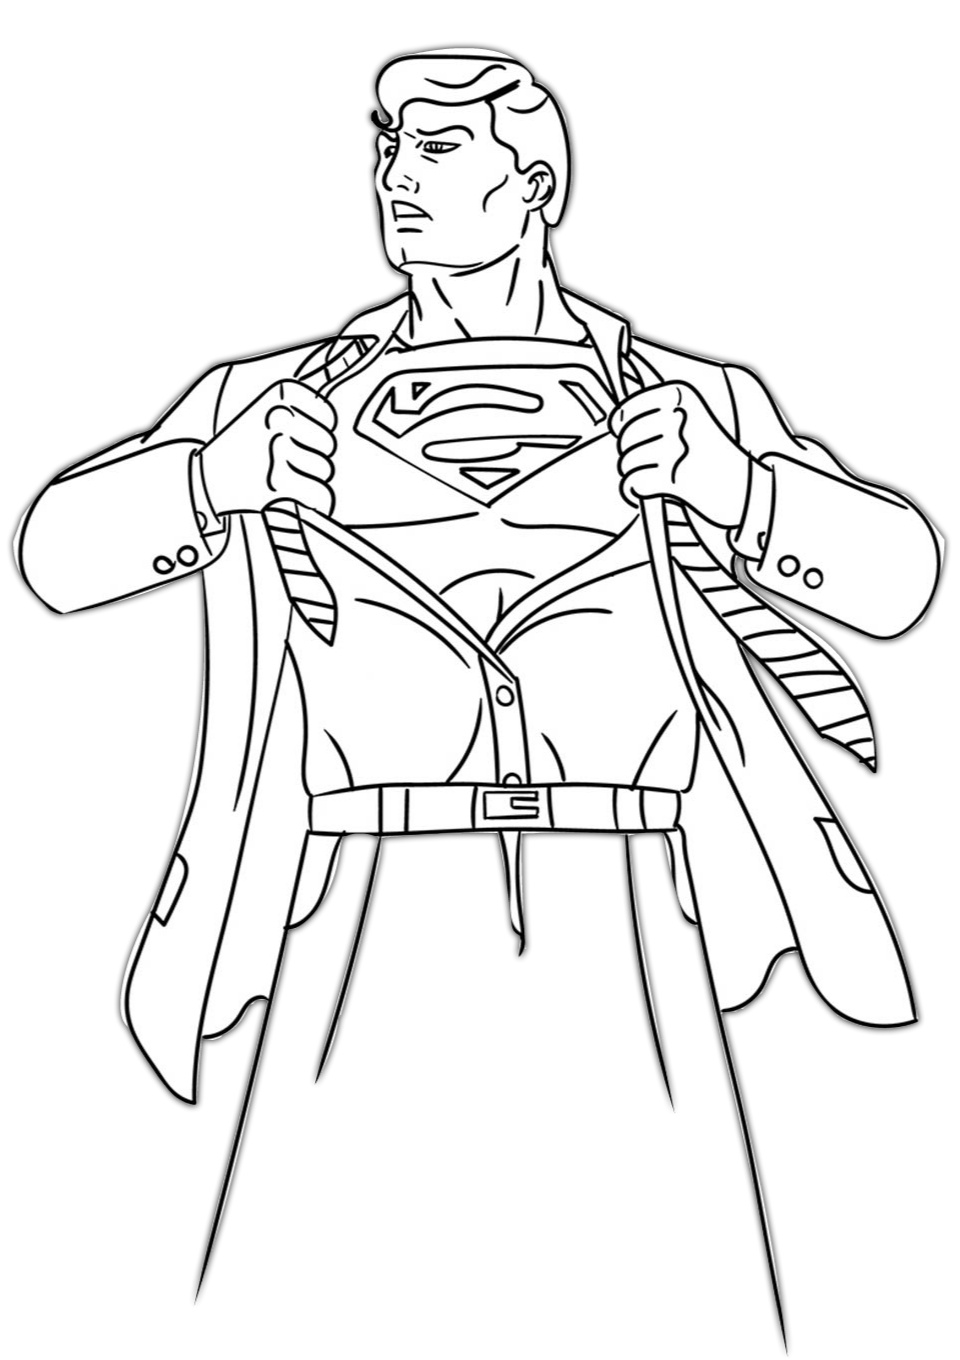 Coloring Pages of Clark Kent to Superman